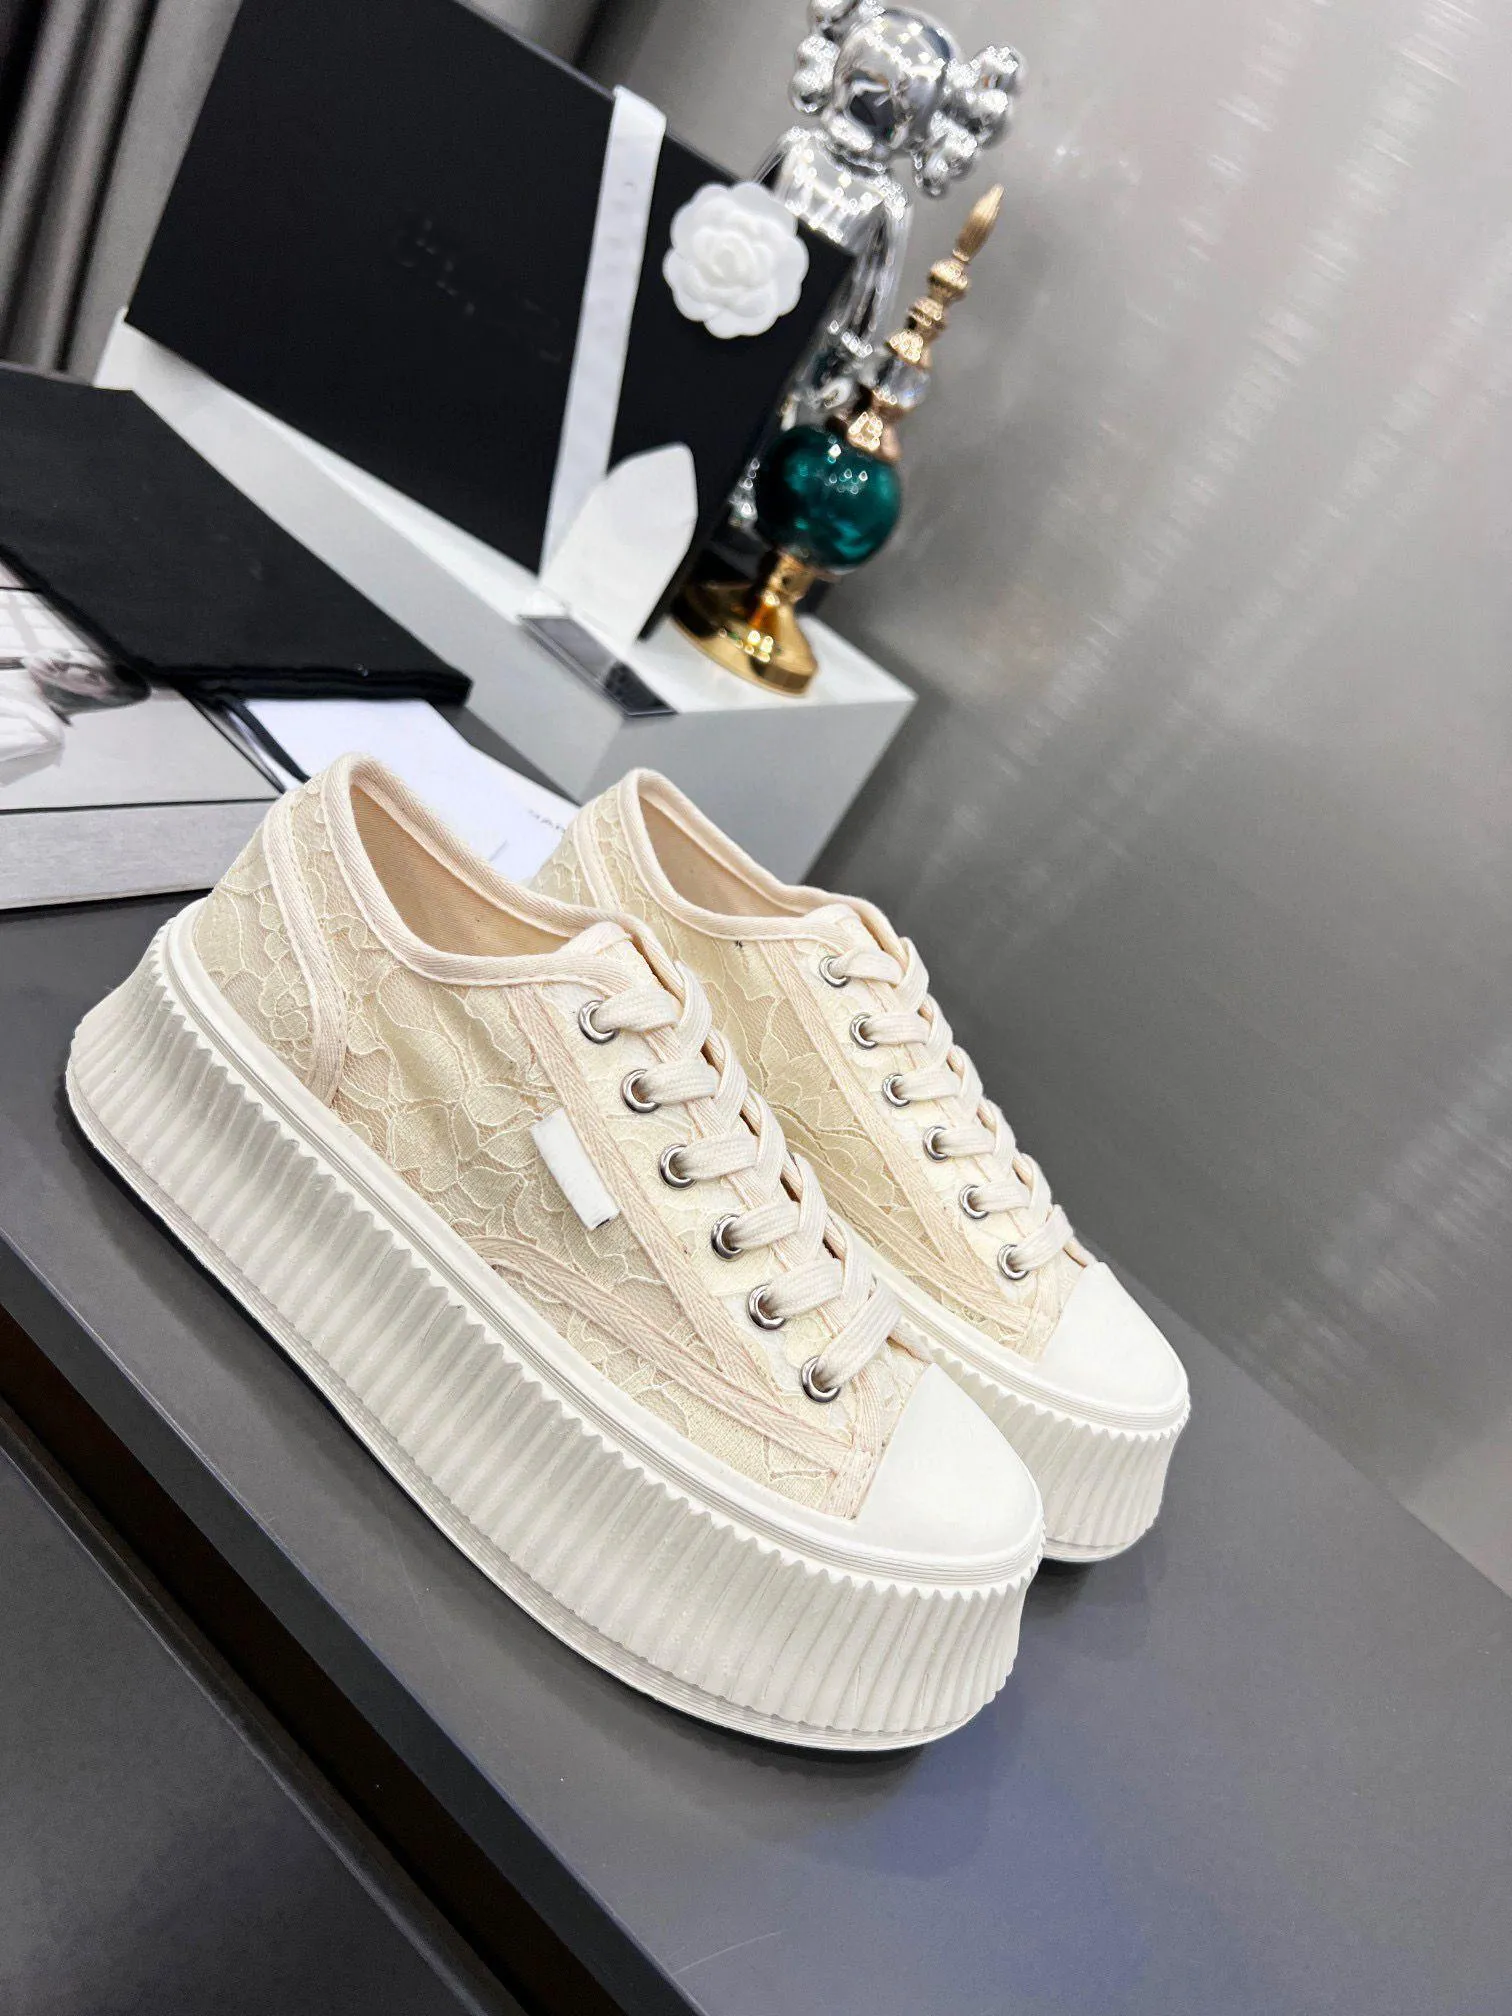 Casual Shoes Lace-Up Running Trainers Woman Shoe Sneakers White Women Travel Leather Lady Thick Soled Designer Platform Gym Sneaker 100% Cowhide Size 35-41